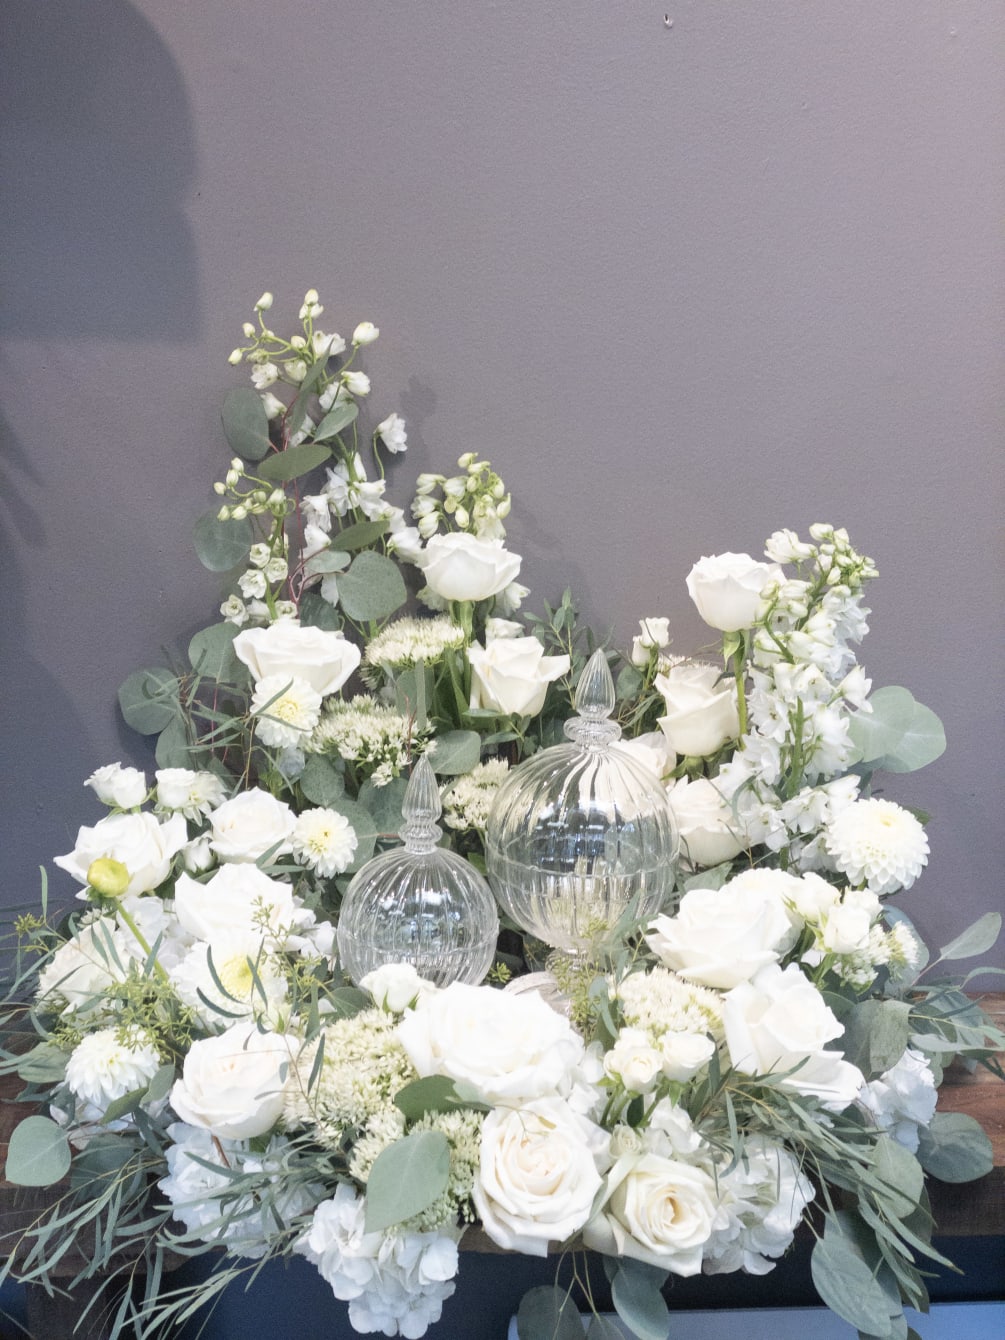 This arrangement is a flat-lying wreath with a space in the center